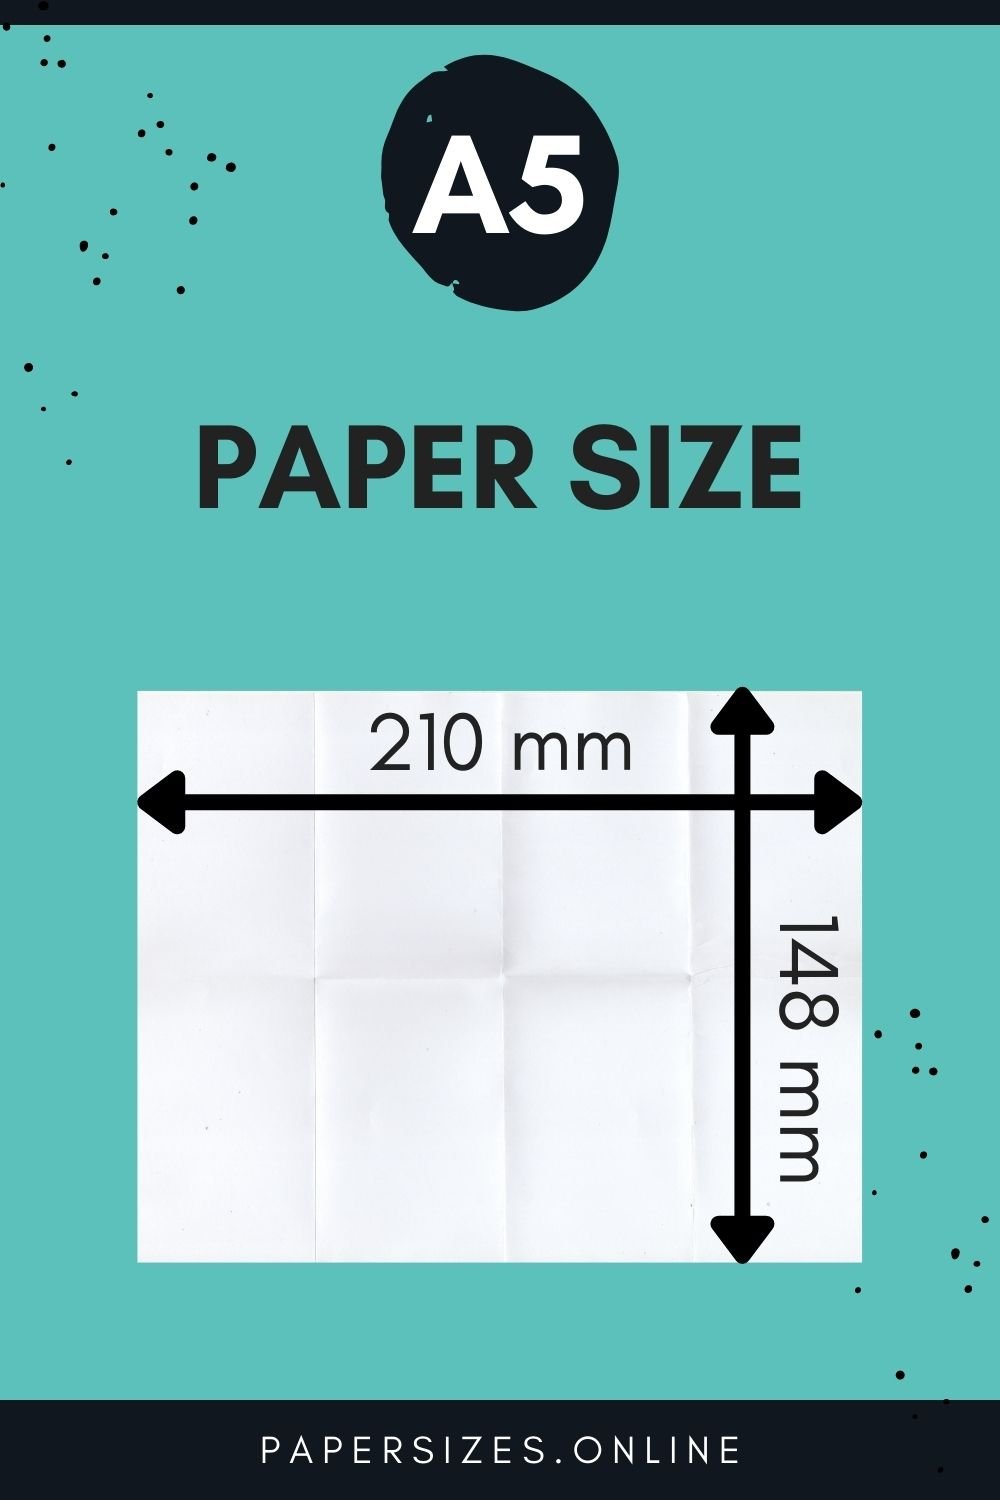 a5-paper-sizes-and-dimensions-paper-sizes-online